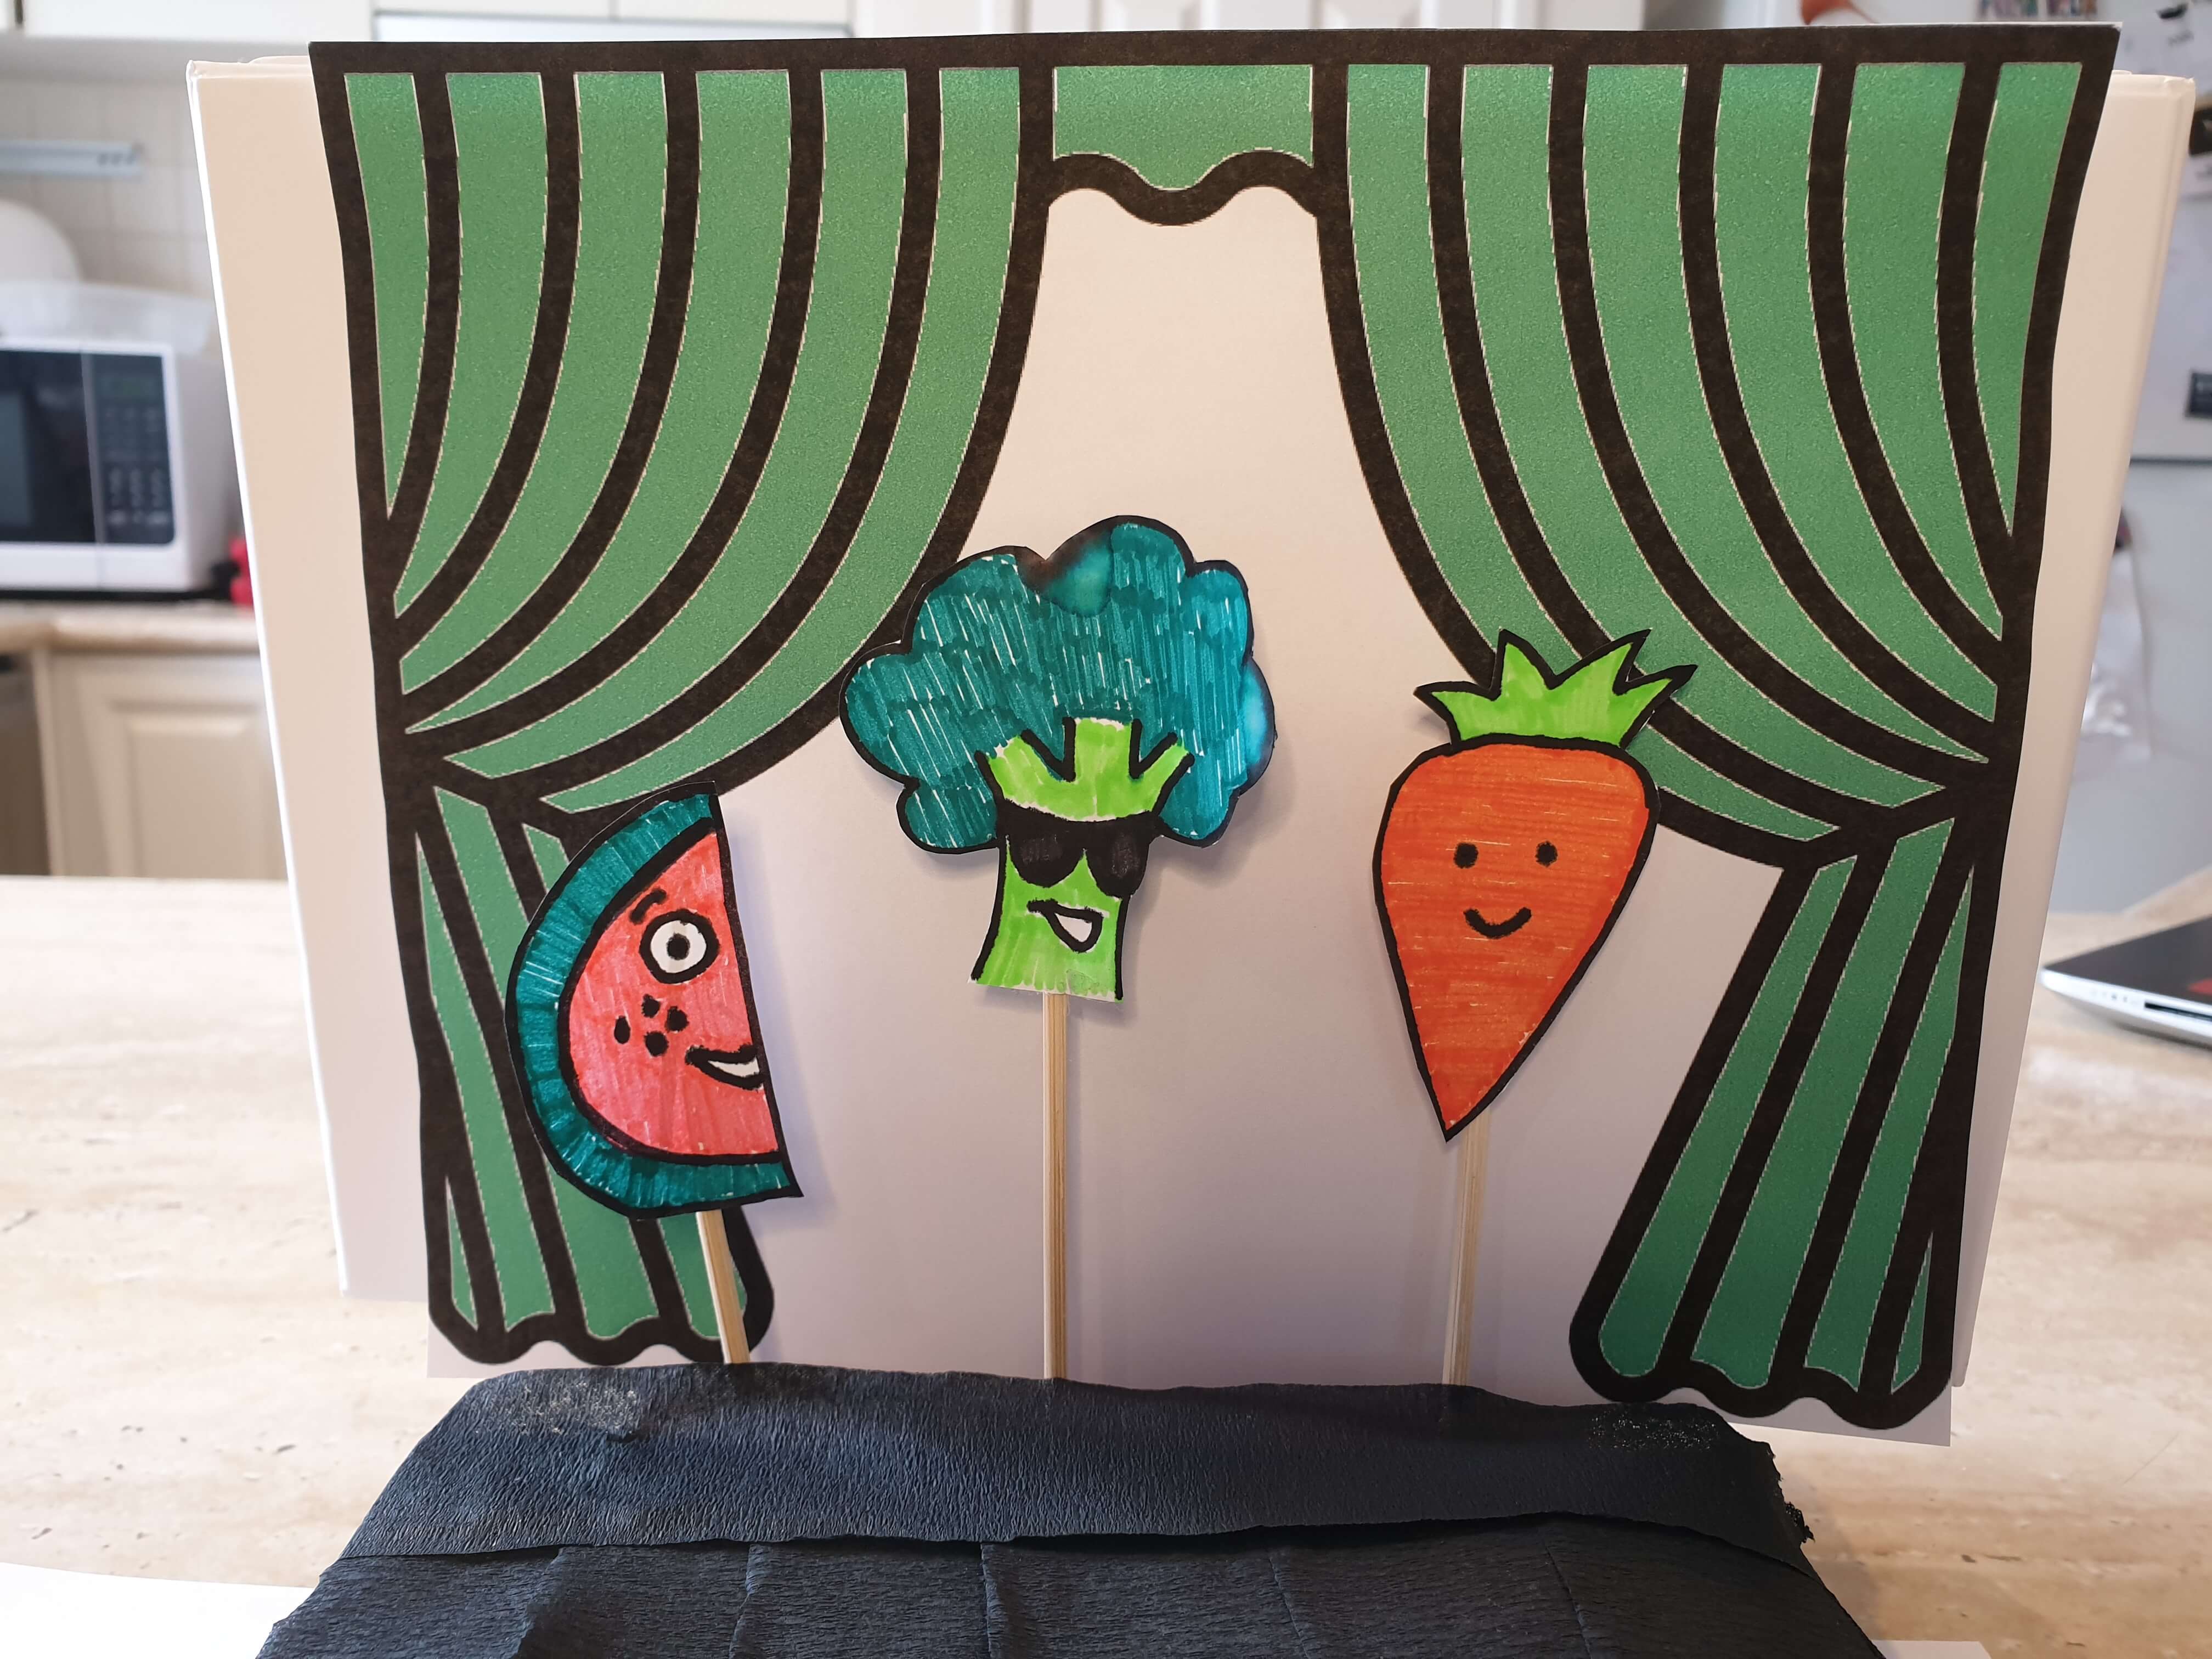 Vegetable and Fruit Puppet Theatre